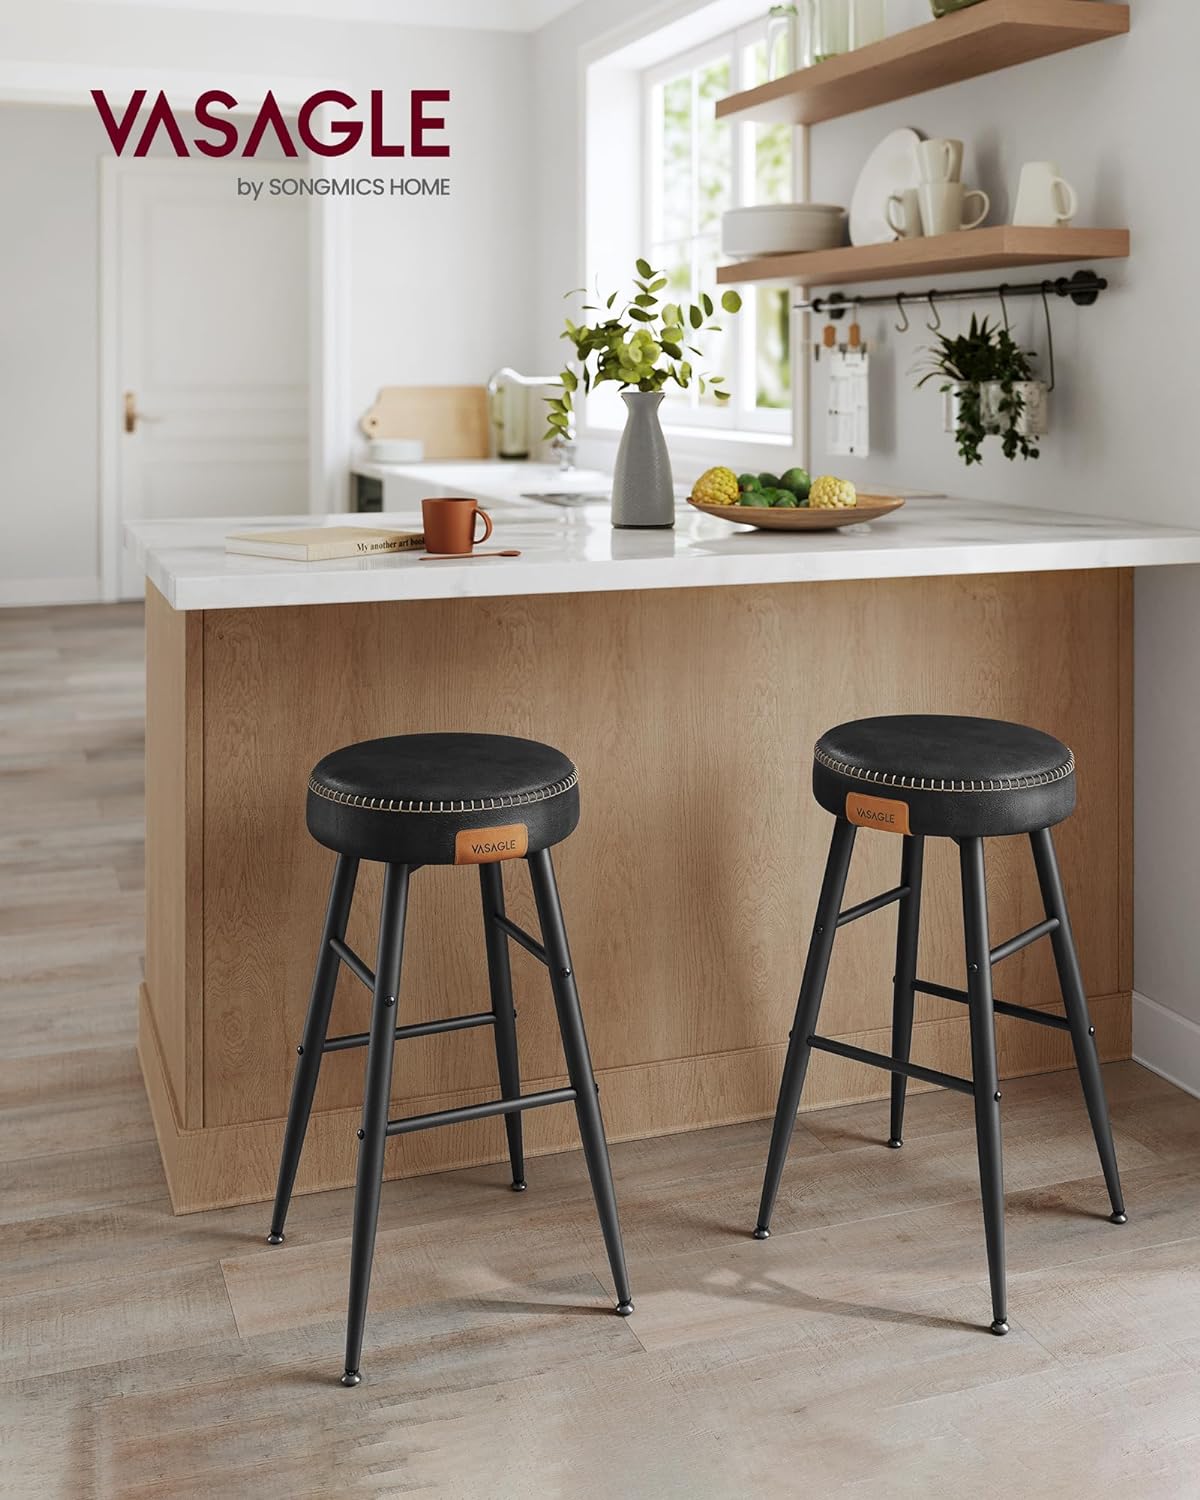 VASAGLE EKHO Collection - Bar Stools Set of 2, Kitchen Counter Stools, Breakfast Stools, Synthetic Leather with Stitching, 24.8-Inch Tall, Home Bar Dining Room, Easy Assembly, Ink Black LBC080B01